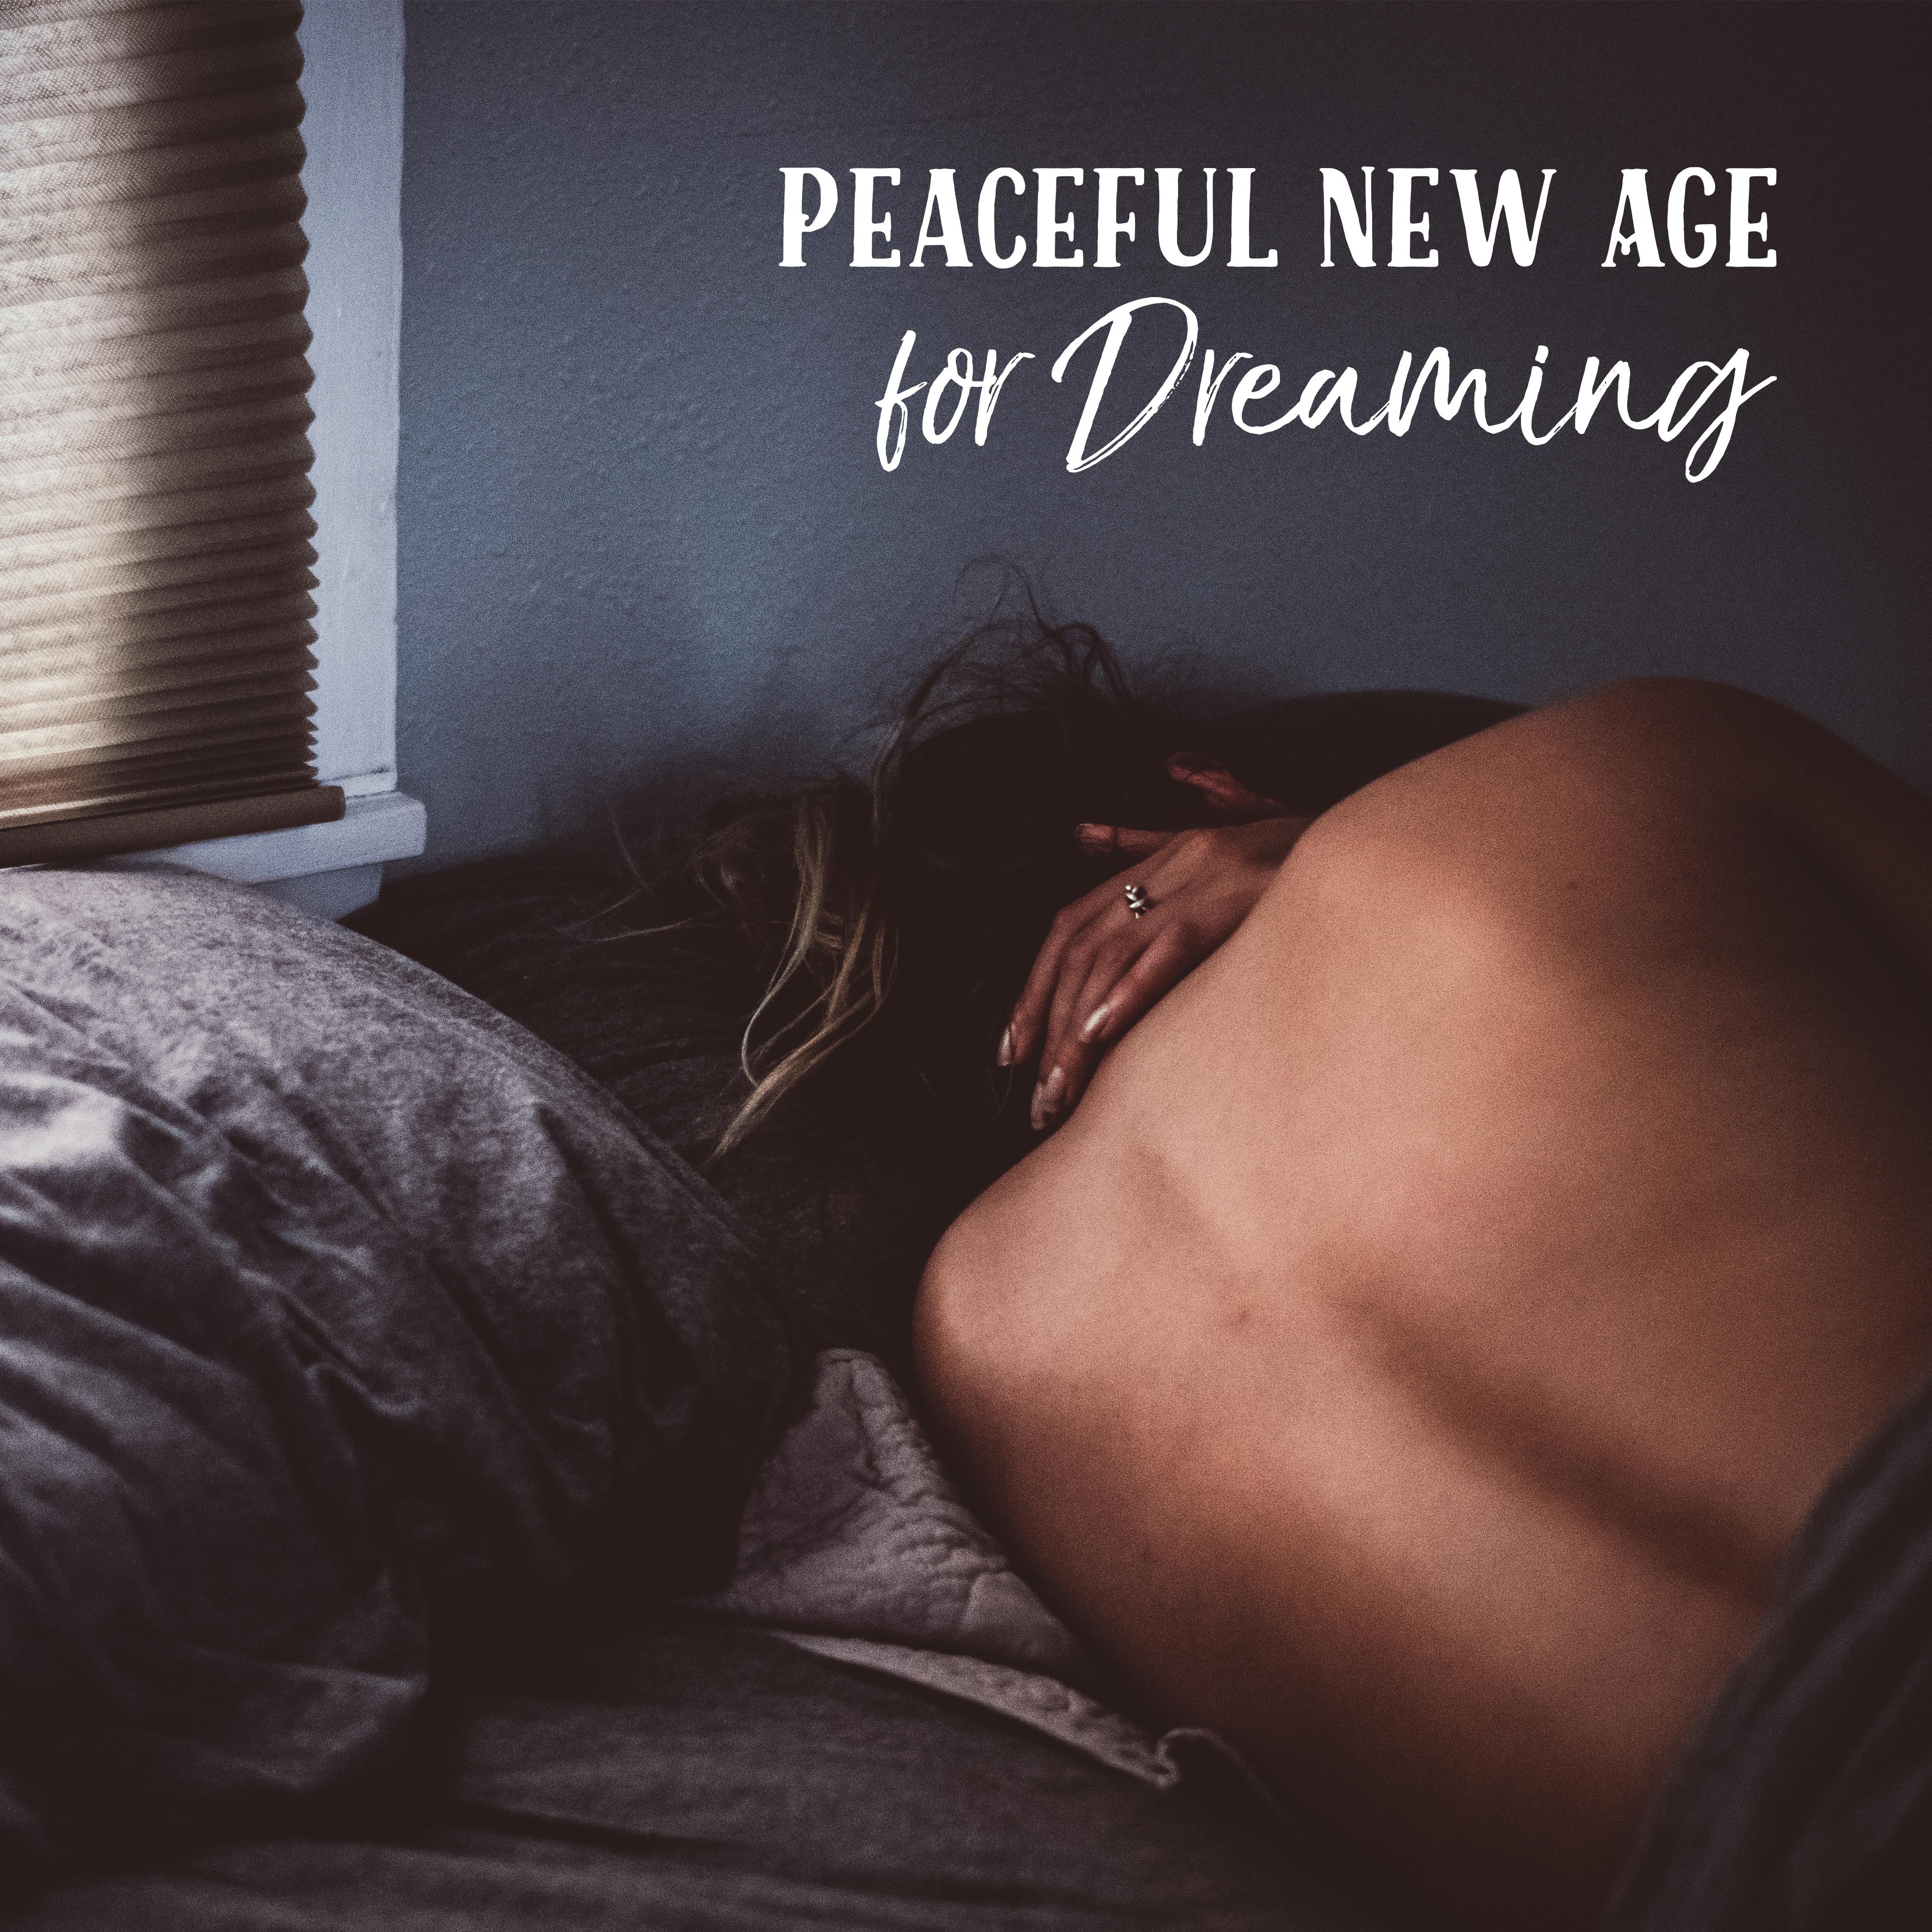 Peaceful New Age for Dreaming